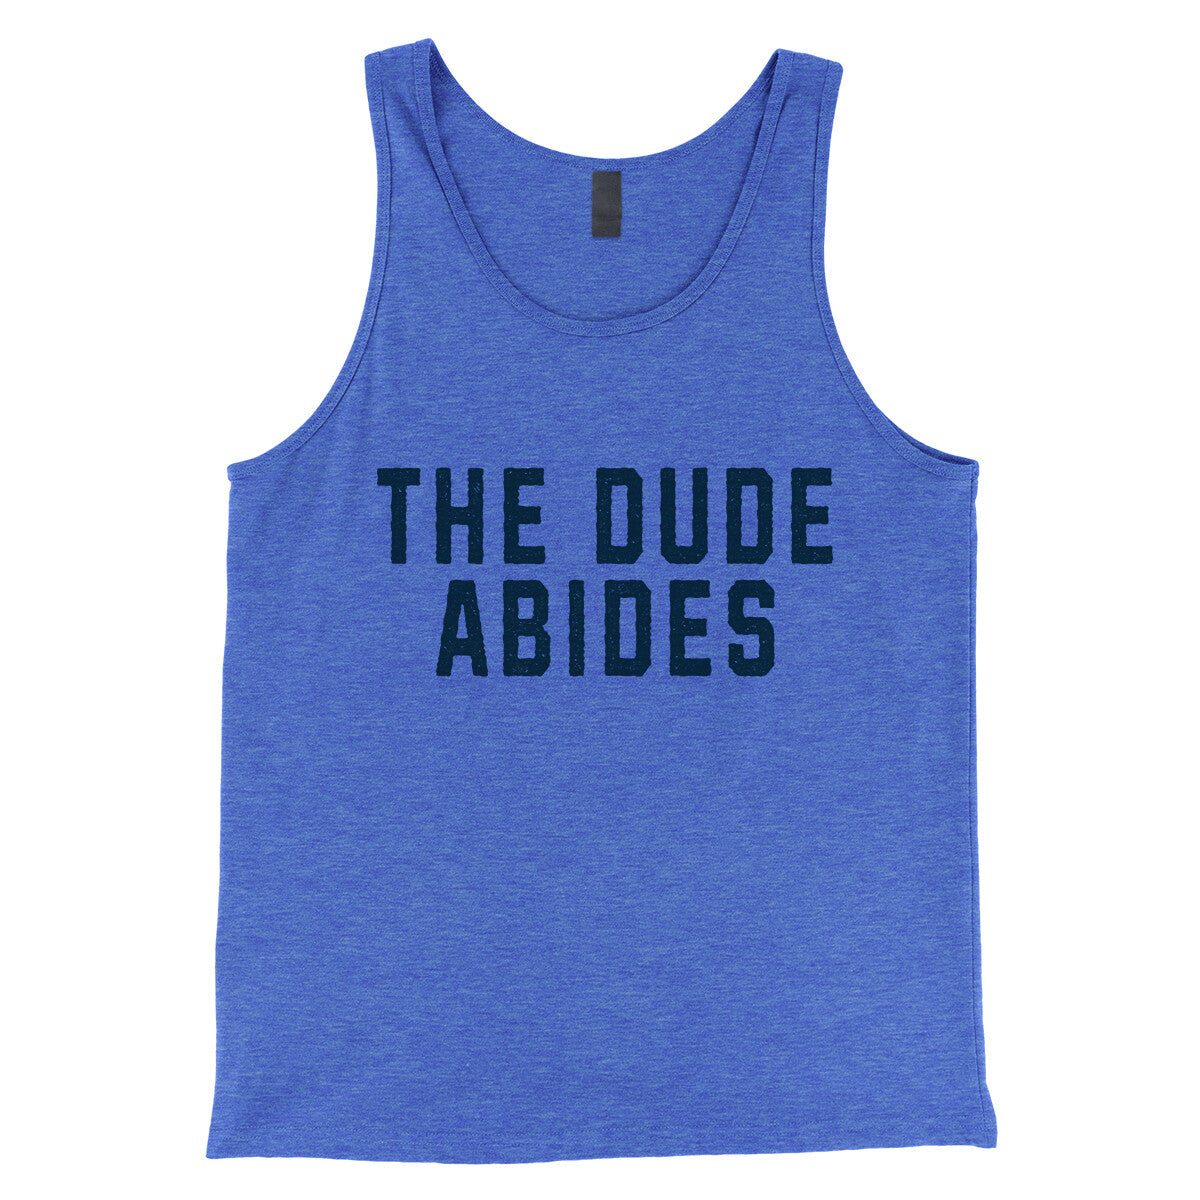 The Dude Abides in True Royal TriBlend Color